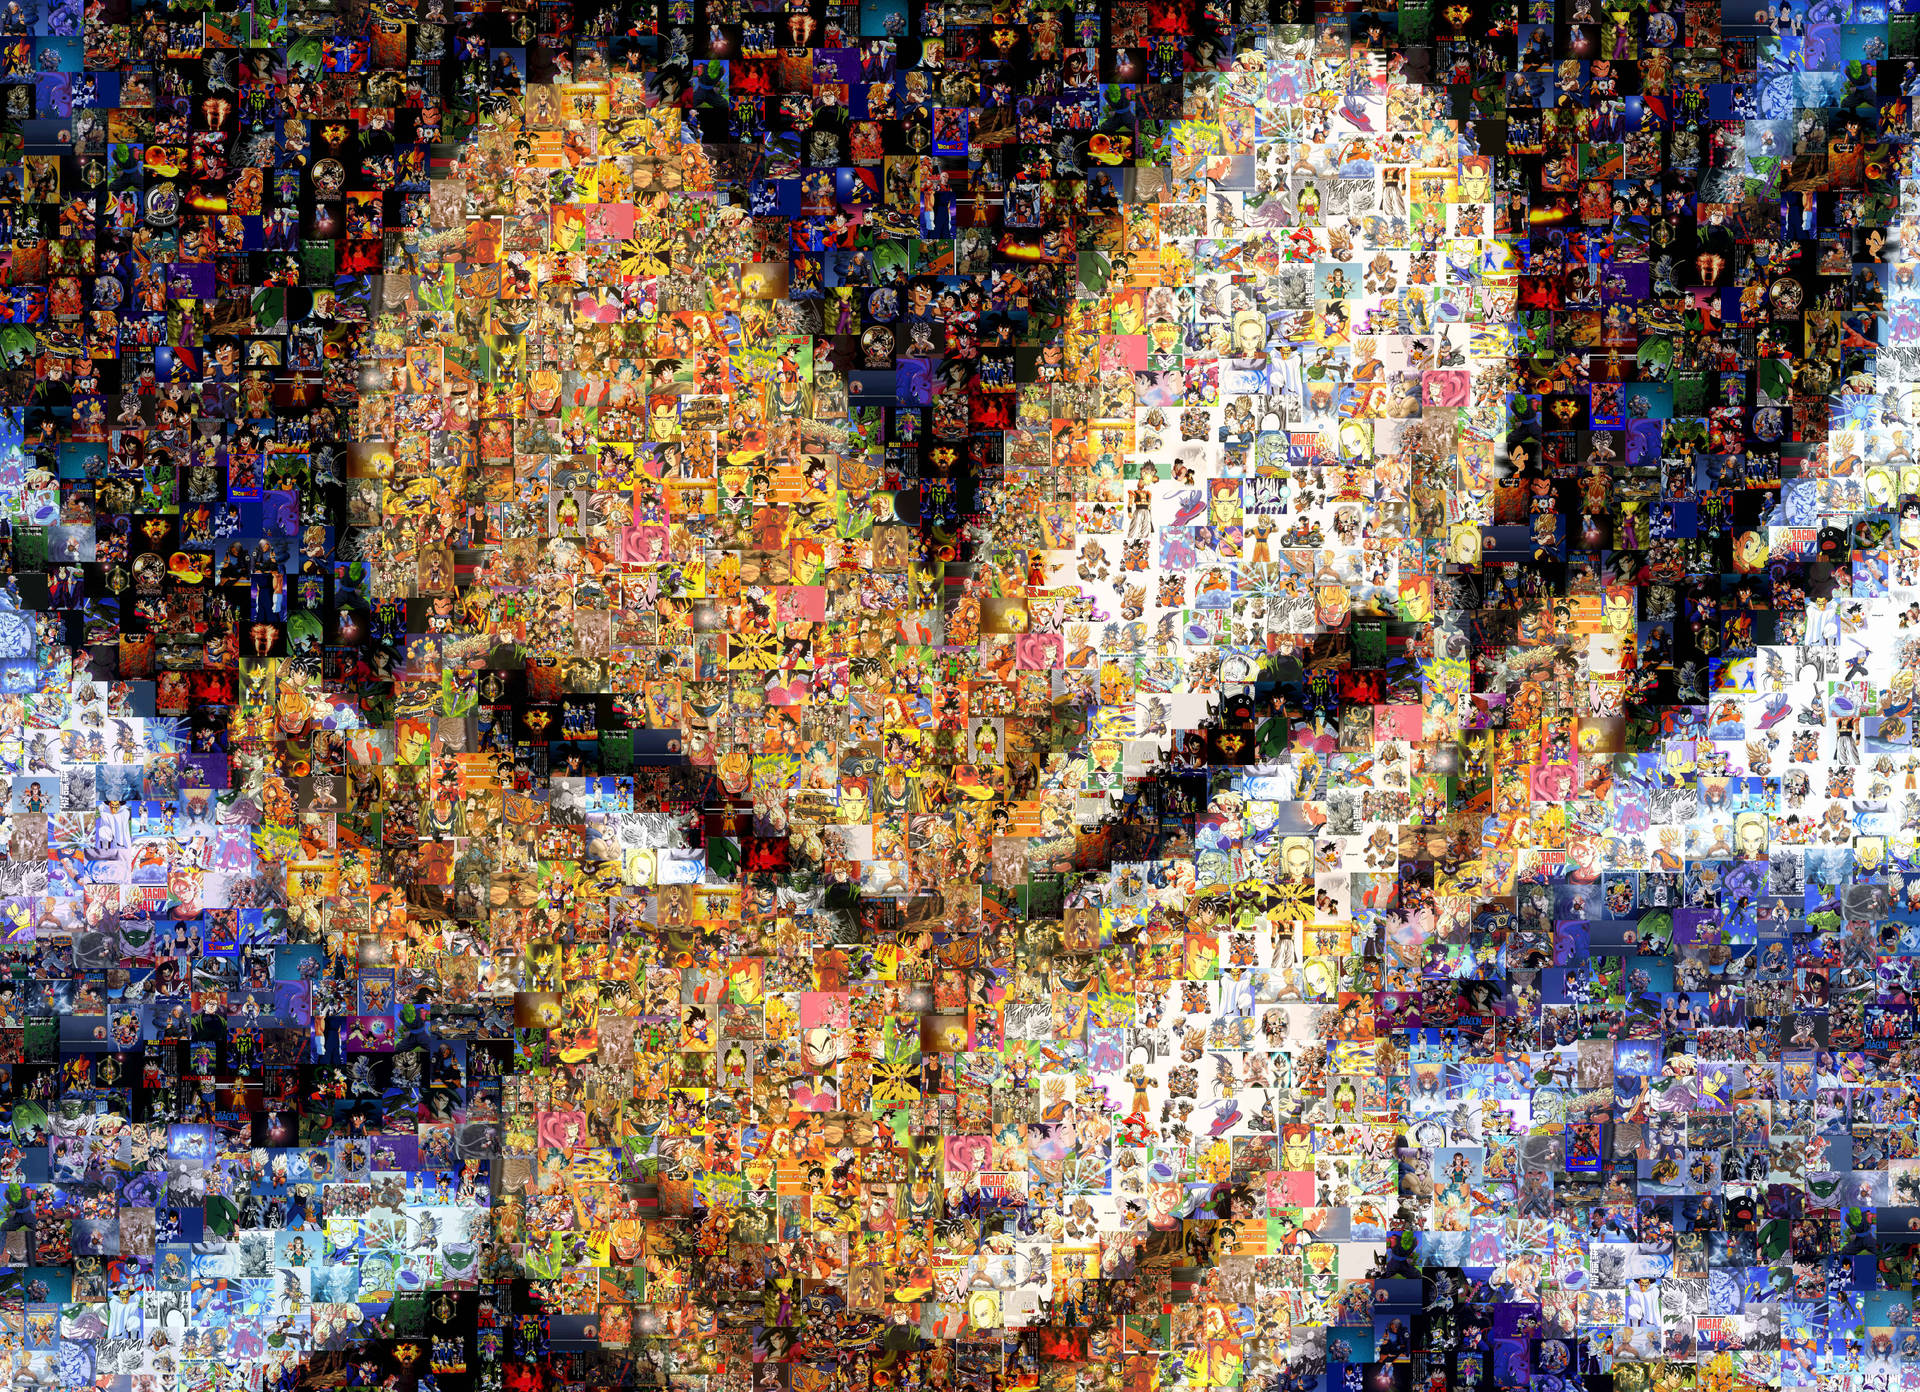 Dbz 7873X5707 Wallpaper and Background Image